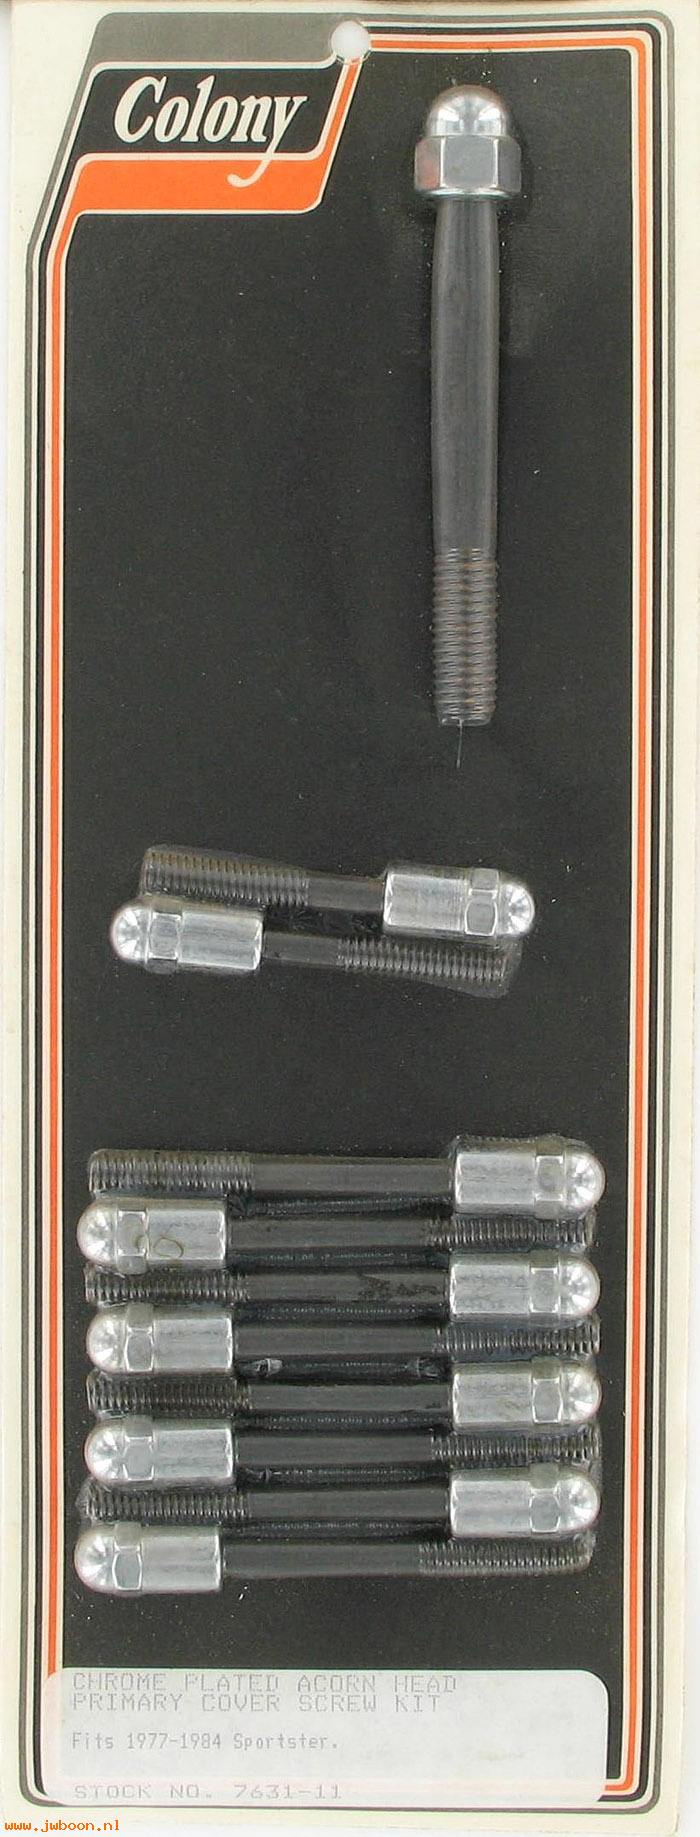 C 7631-11 (): Primary cover screws - Ironhead Sporty XL's '77-'85, in stock